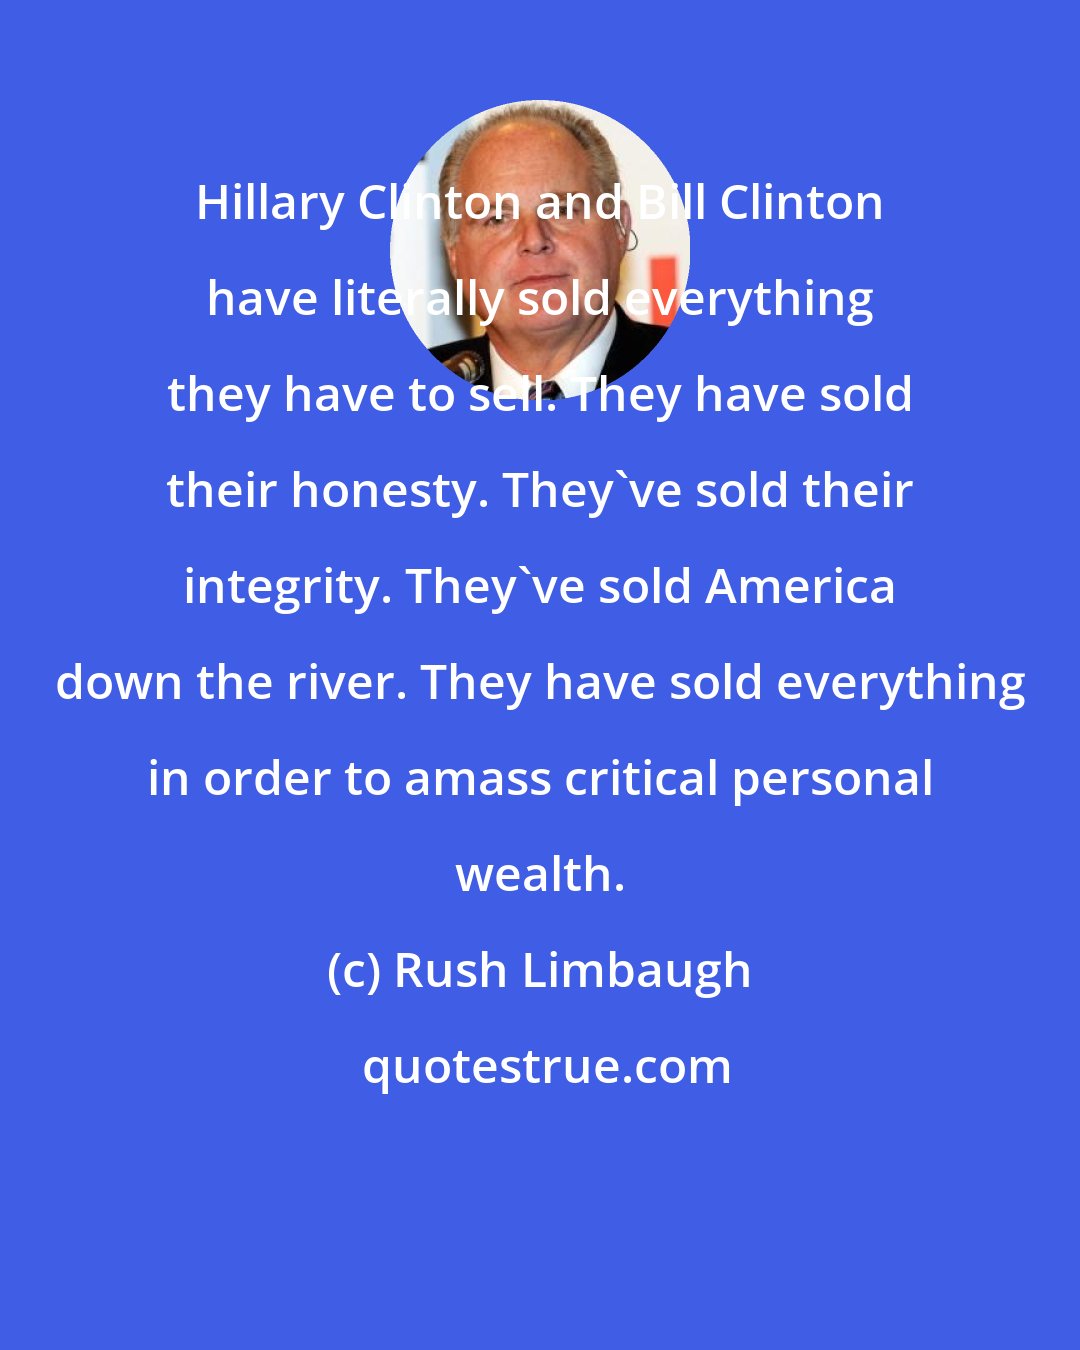 Rush Limbaugh: Hillary Clinton and Bill Clinton have literally sold everything they have to sell. They have sold their honesty. They've sold their integrity. They've sold America down the river. They have sold everything in order to amass critical personal wealth.